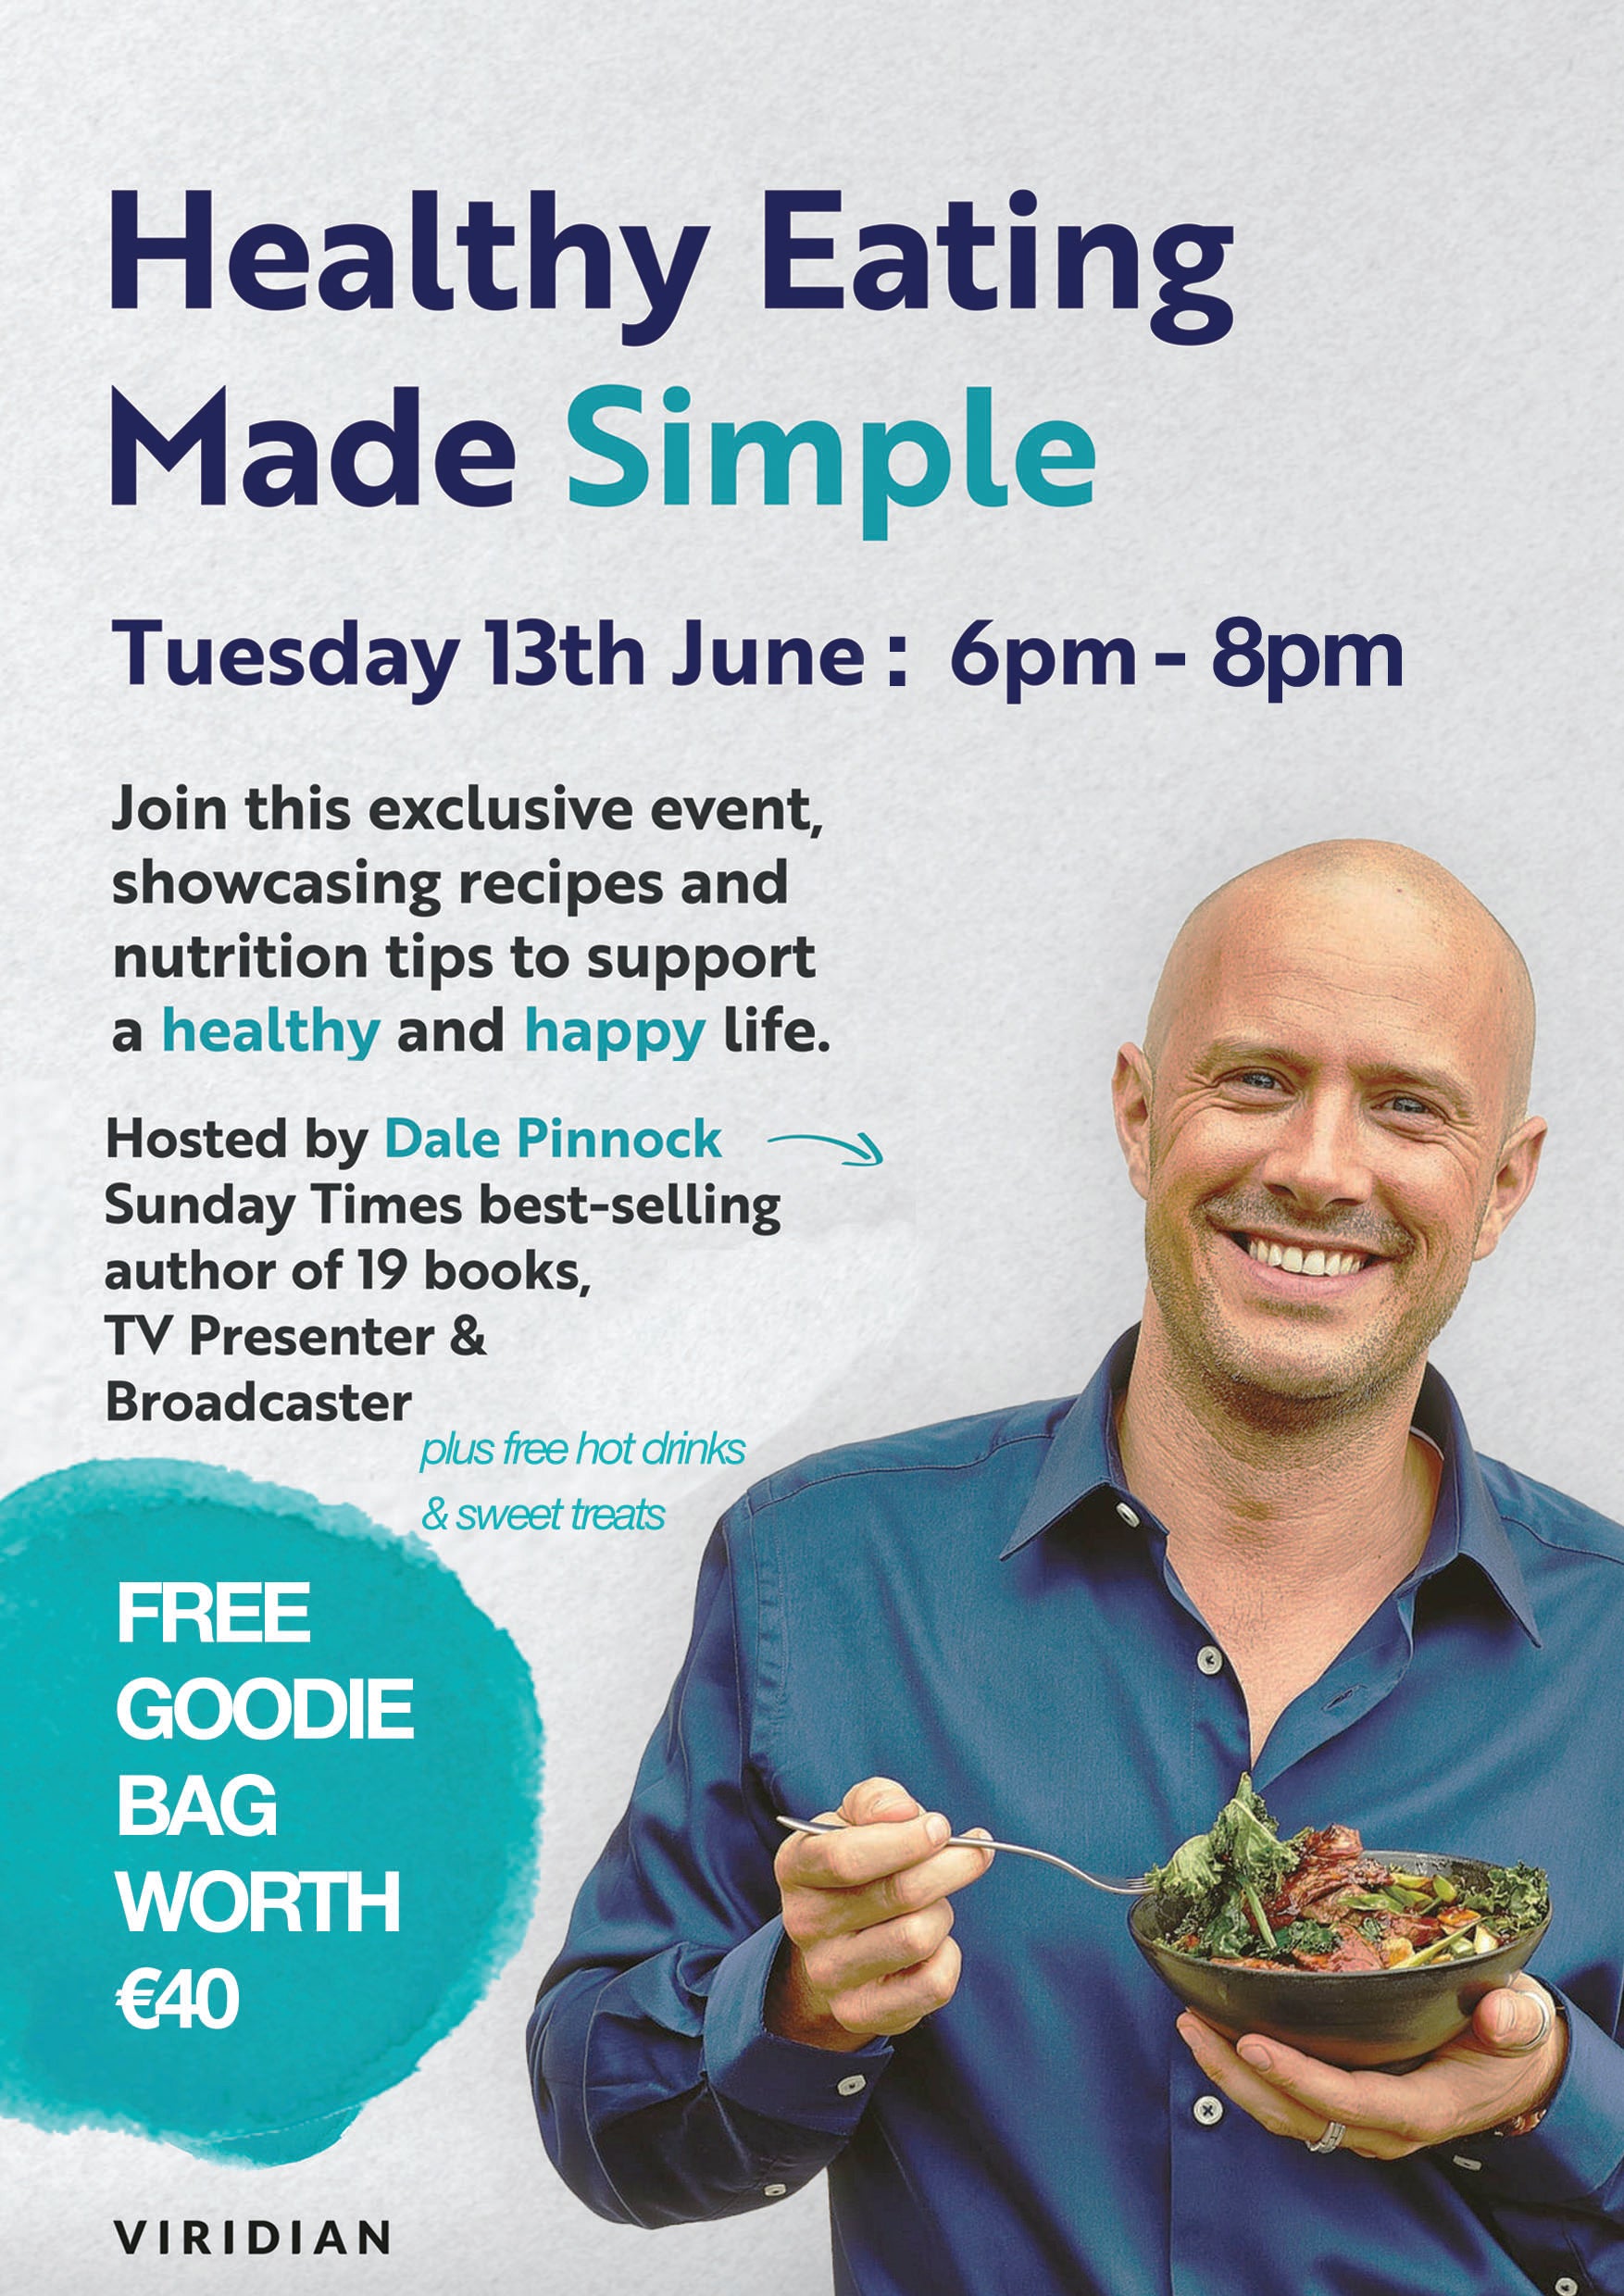 "Healthy Eating Made Simple" Event with Dale Pinnock x 1 Ticket